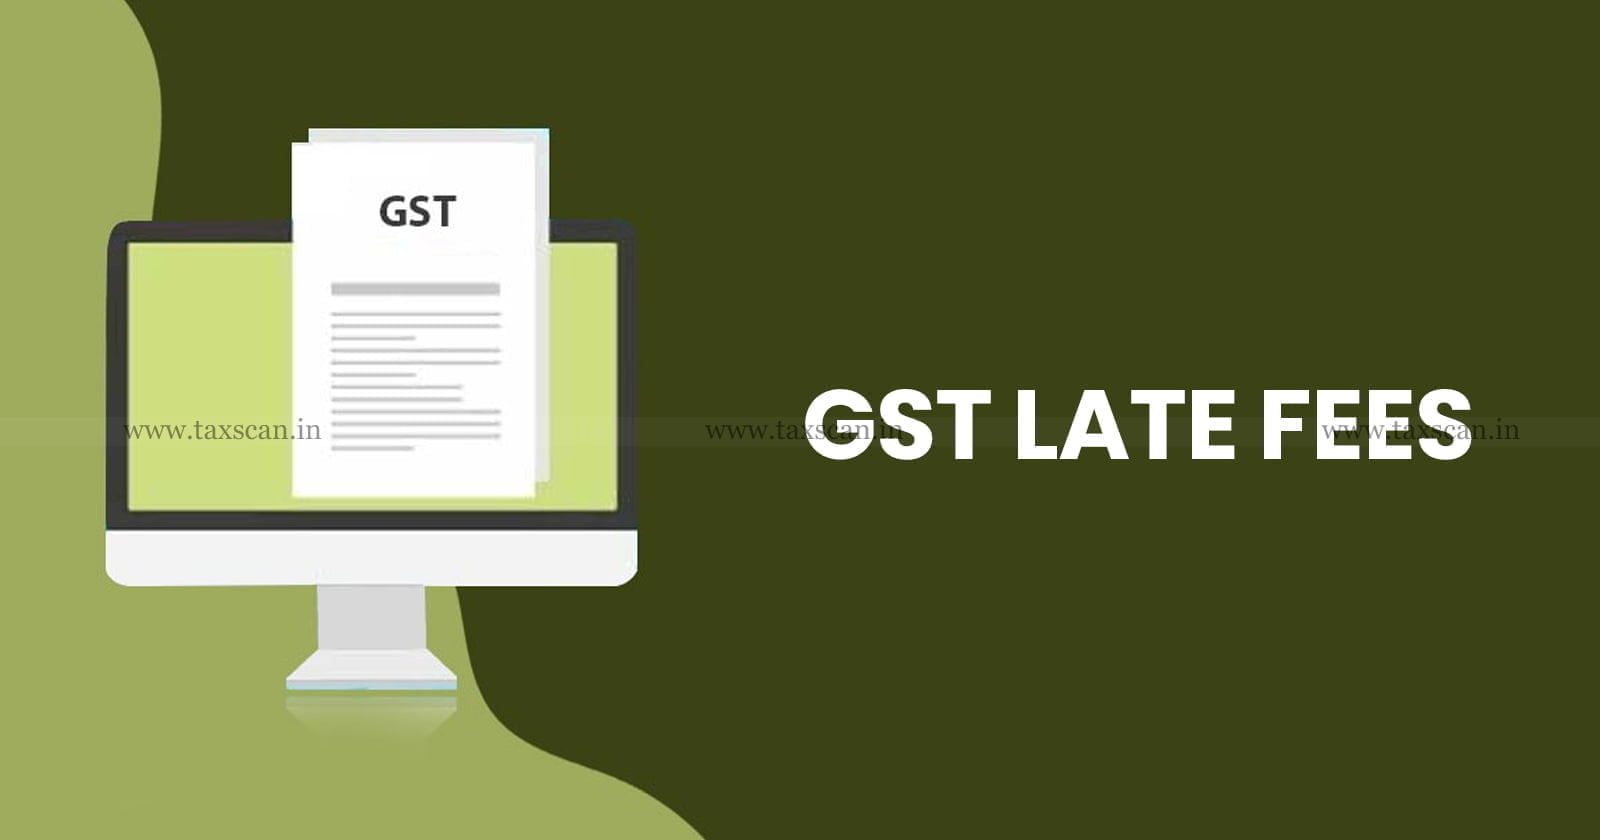 Taxpayers - Rajasthan Government - GST Late Fees - GST - Late Fees - Taxscan